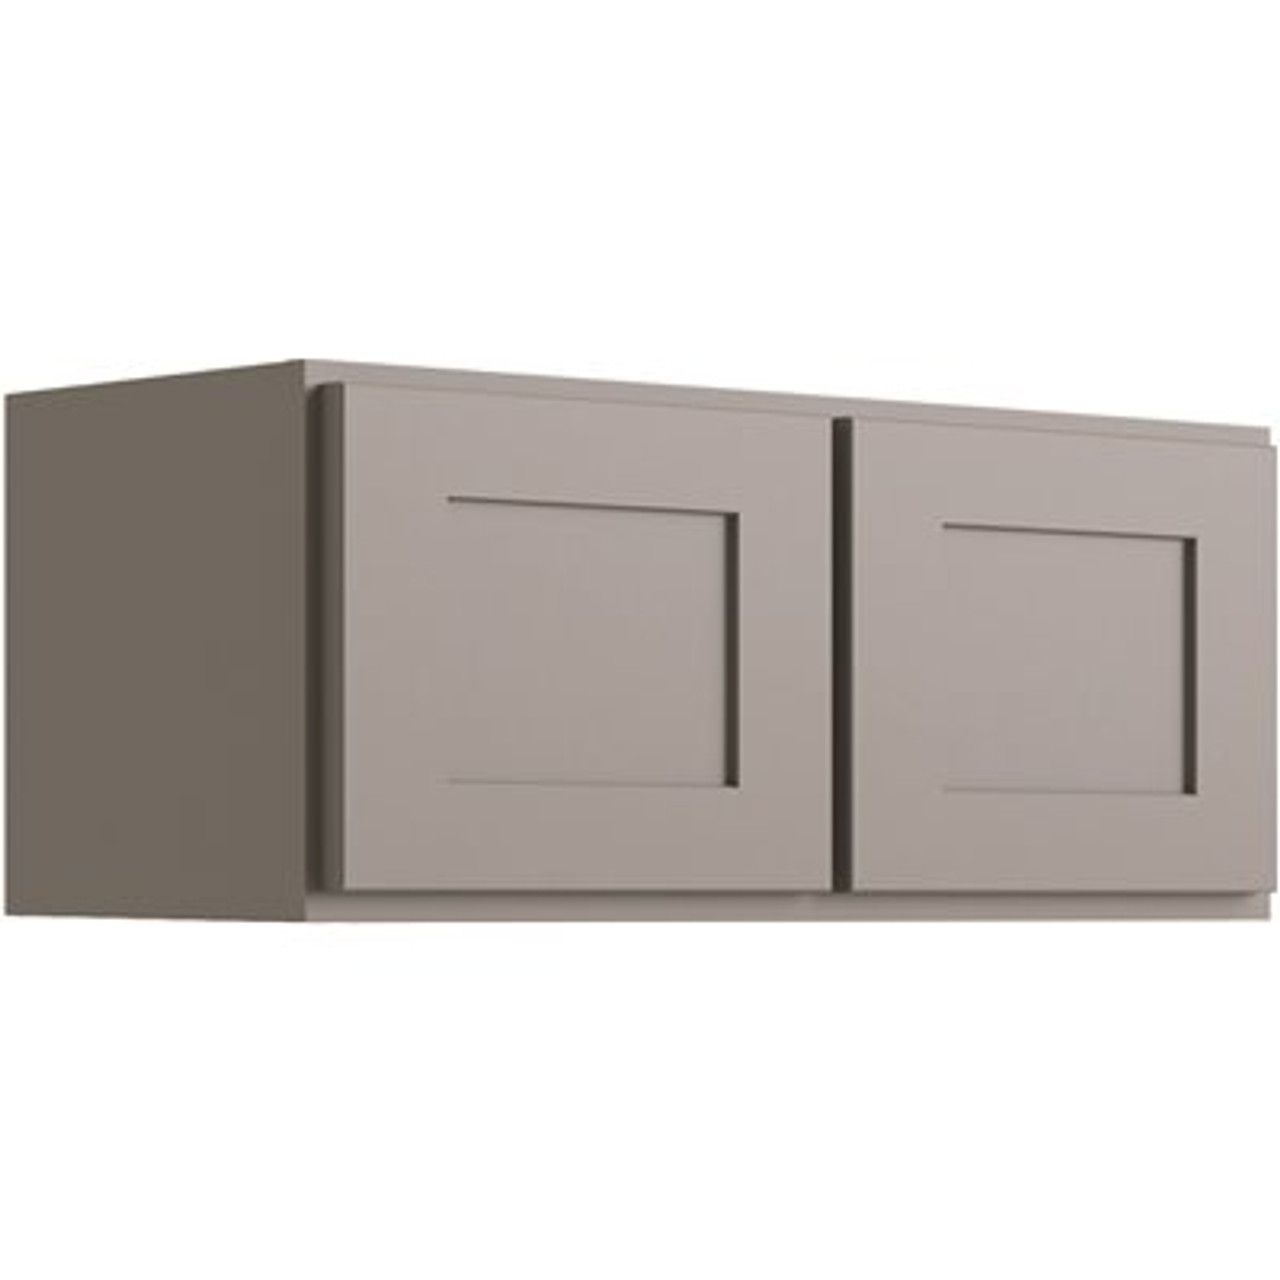 CNC Cabinetry Luxor 2-Door Wall Cabinet, 33"w X 15"h X 12"d, Shaker Misty Grey